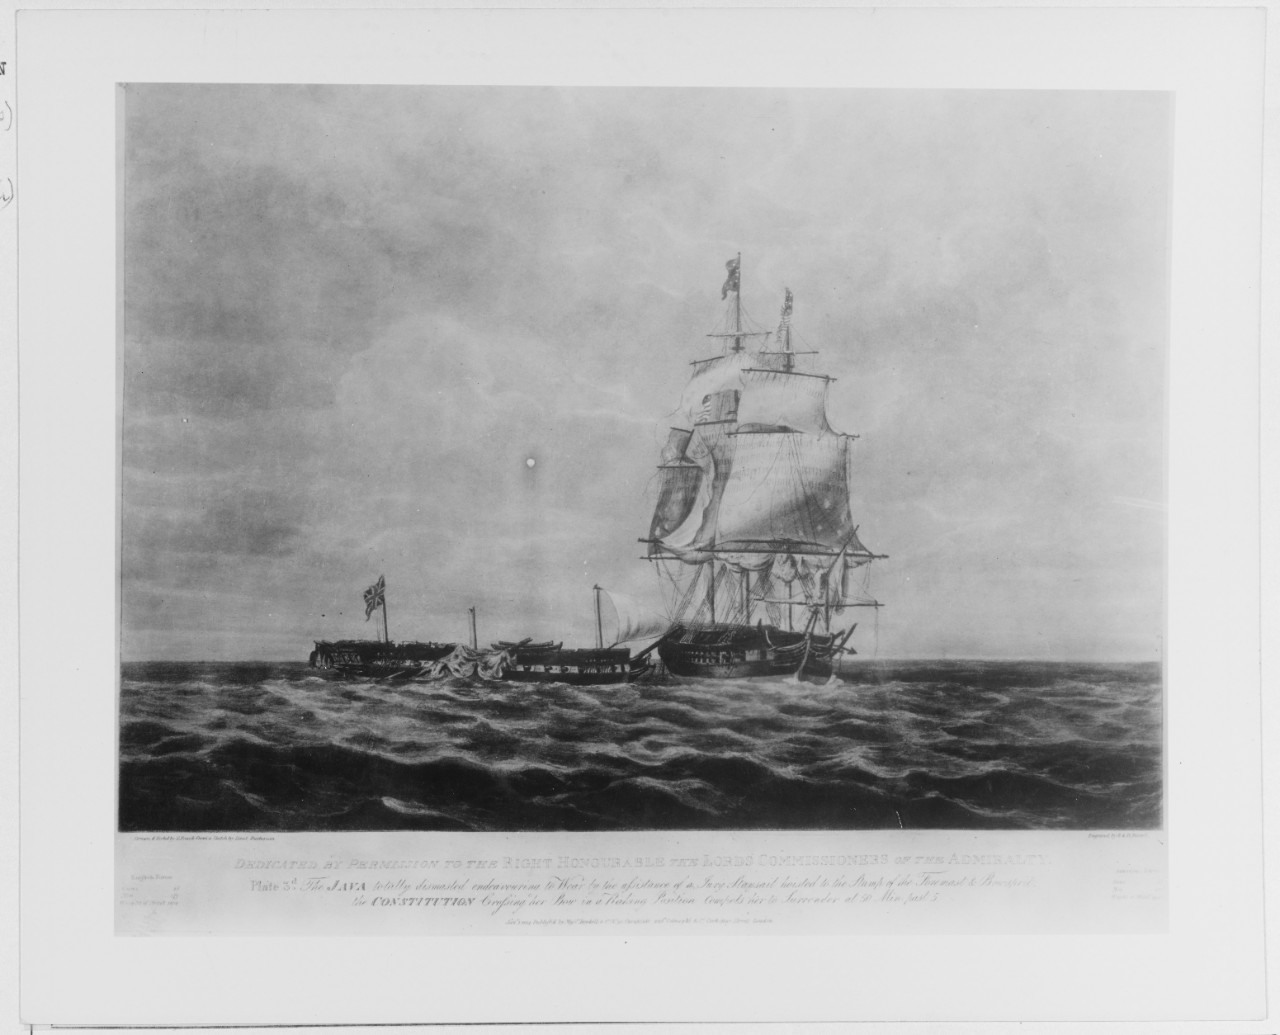 Engagement between USS CONSTITUTION and HMS JAVA 1812